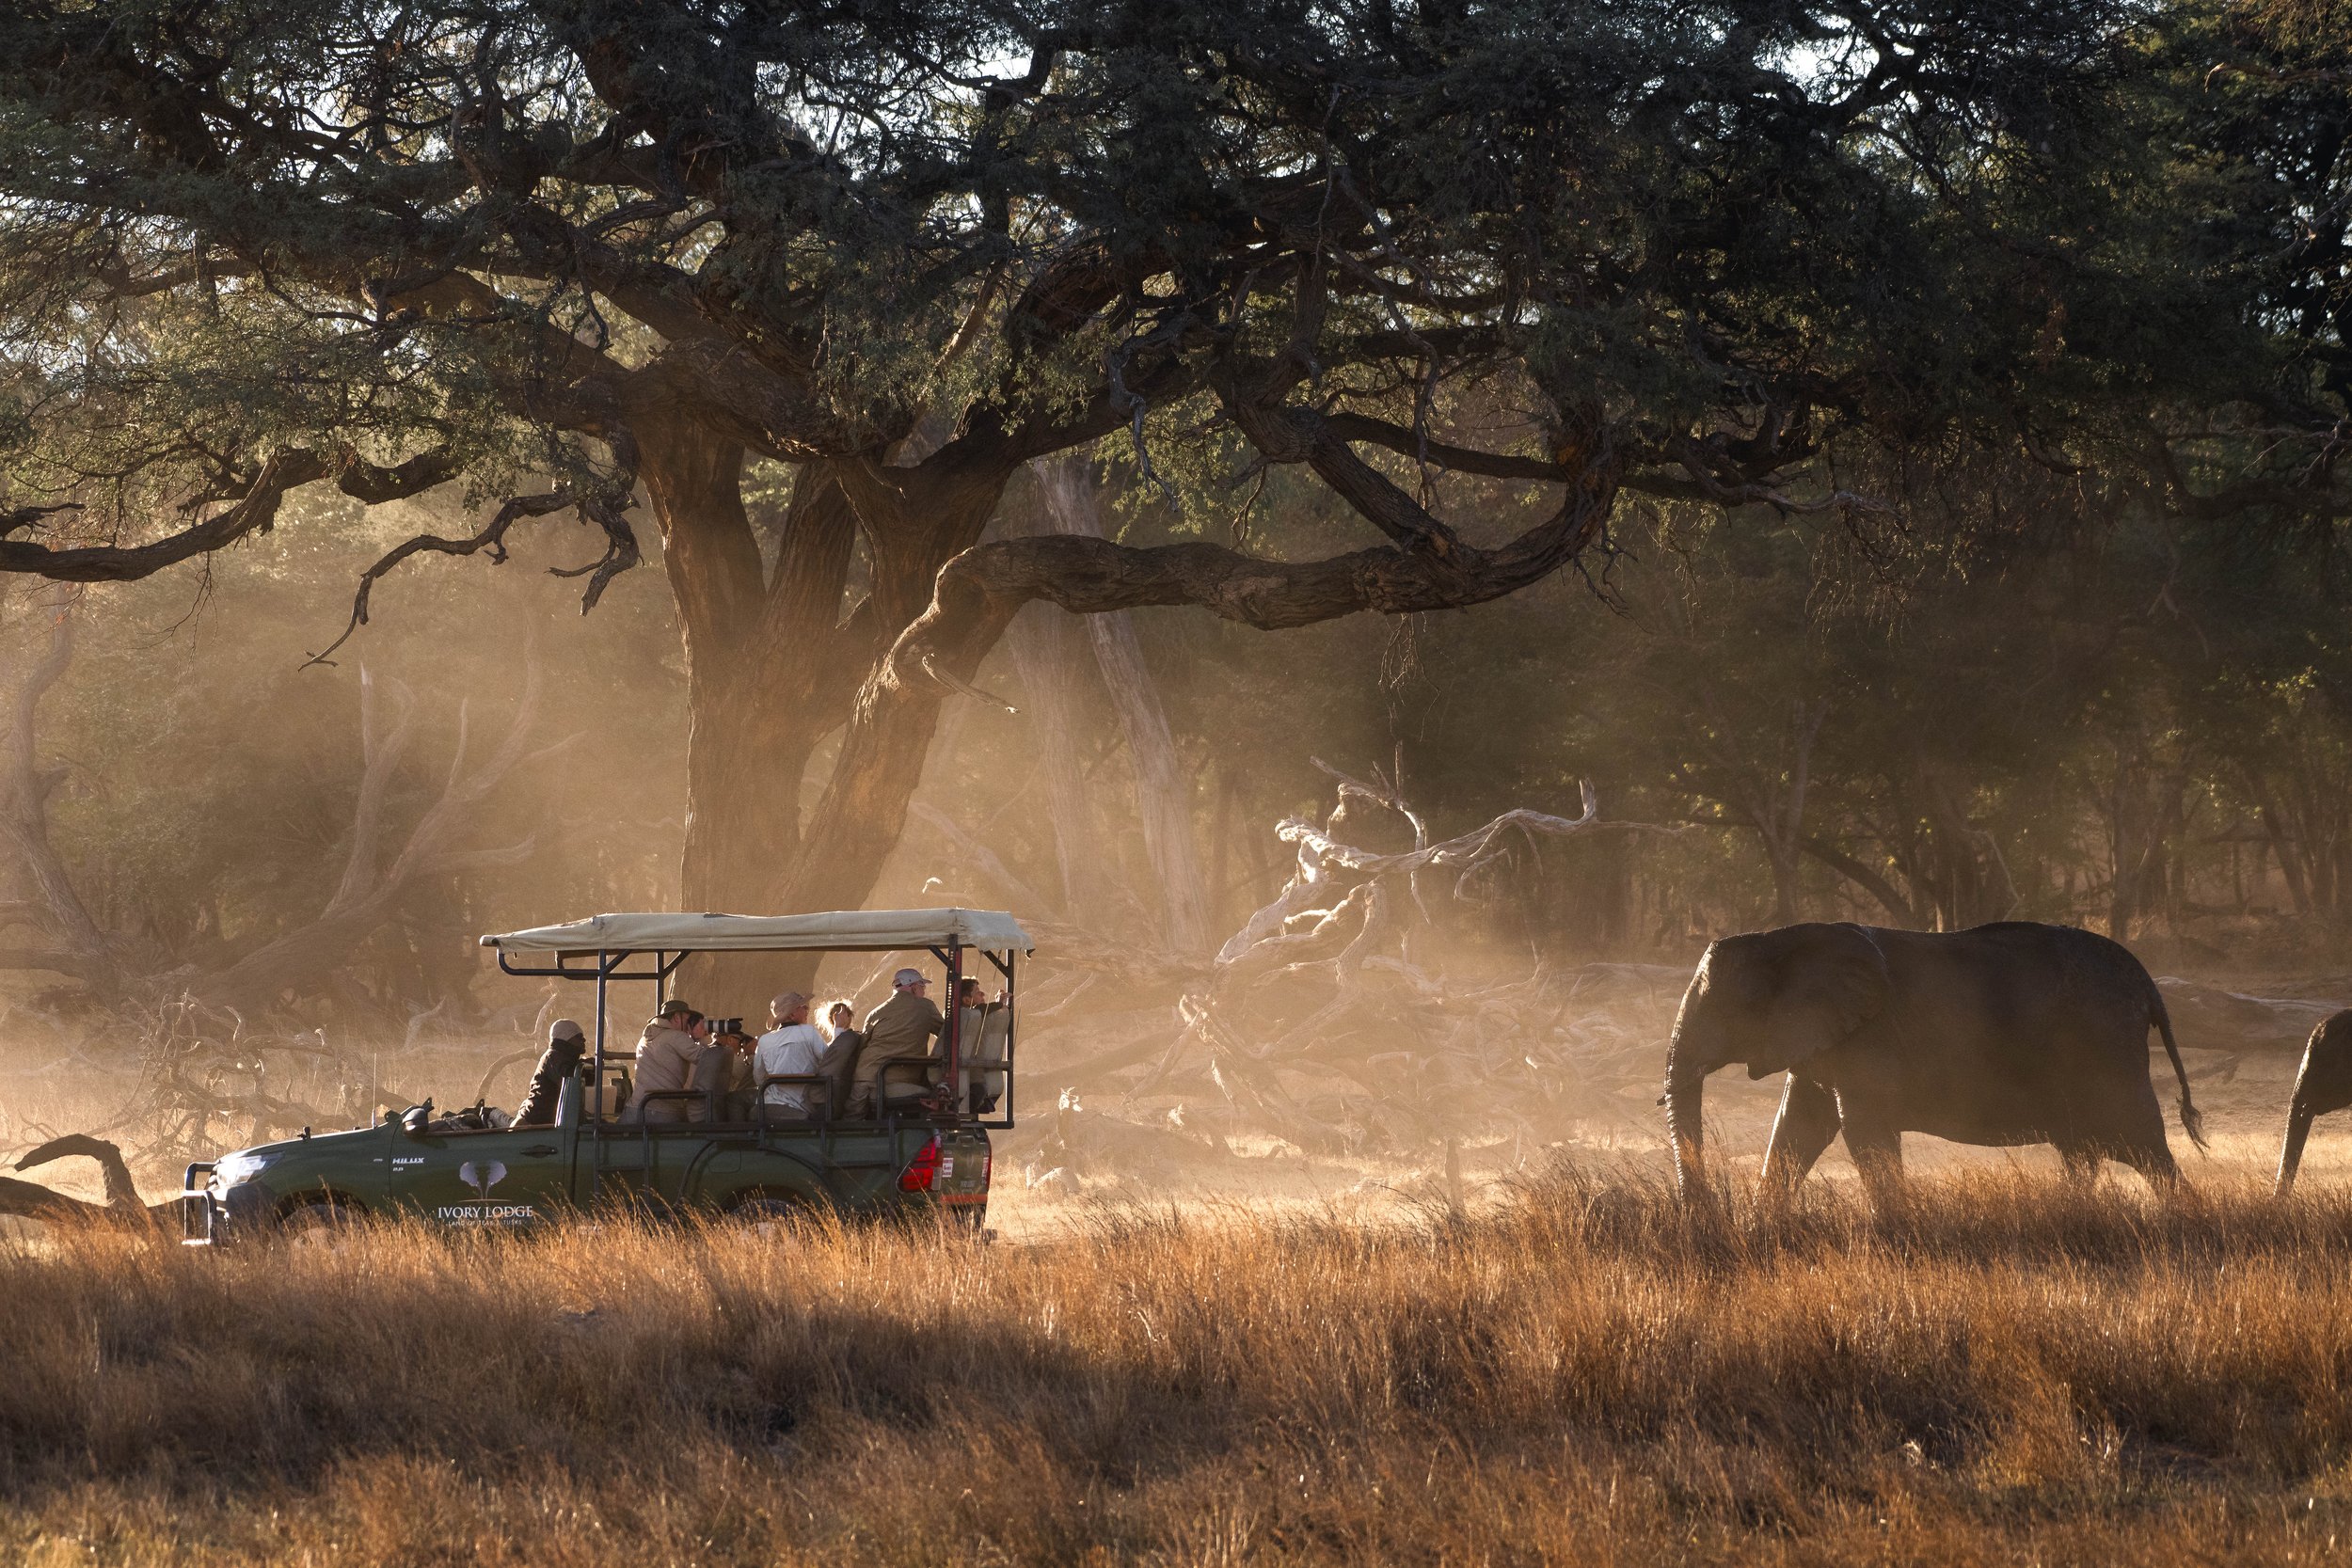 A group of elephants following a safari vehicle with tourists in it.